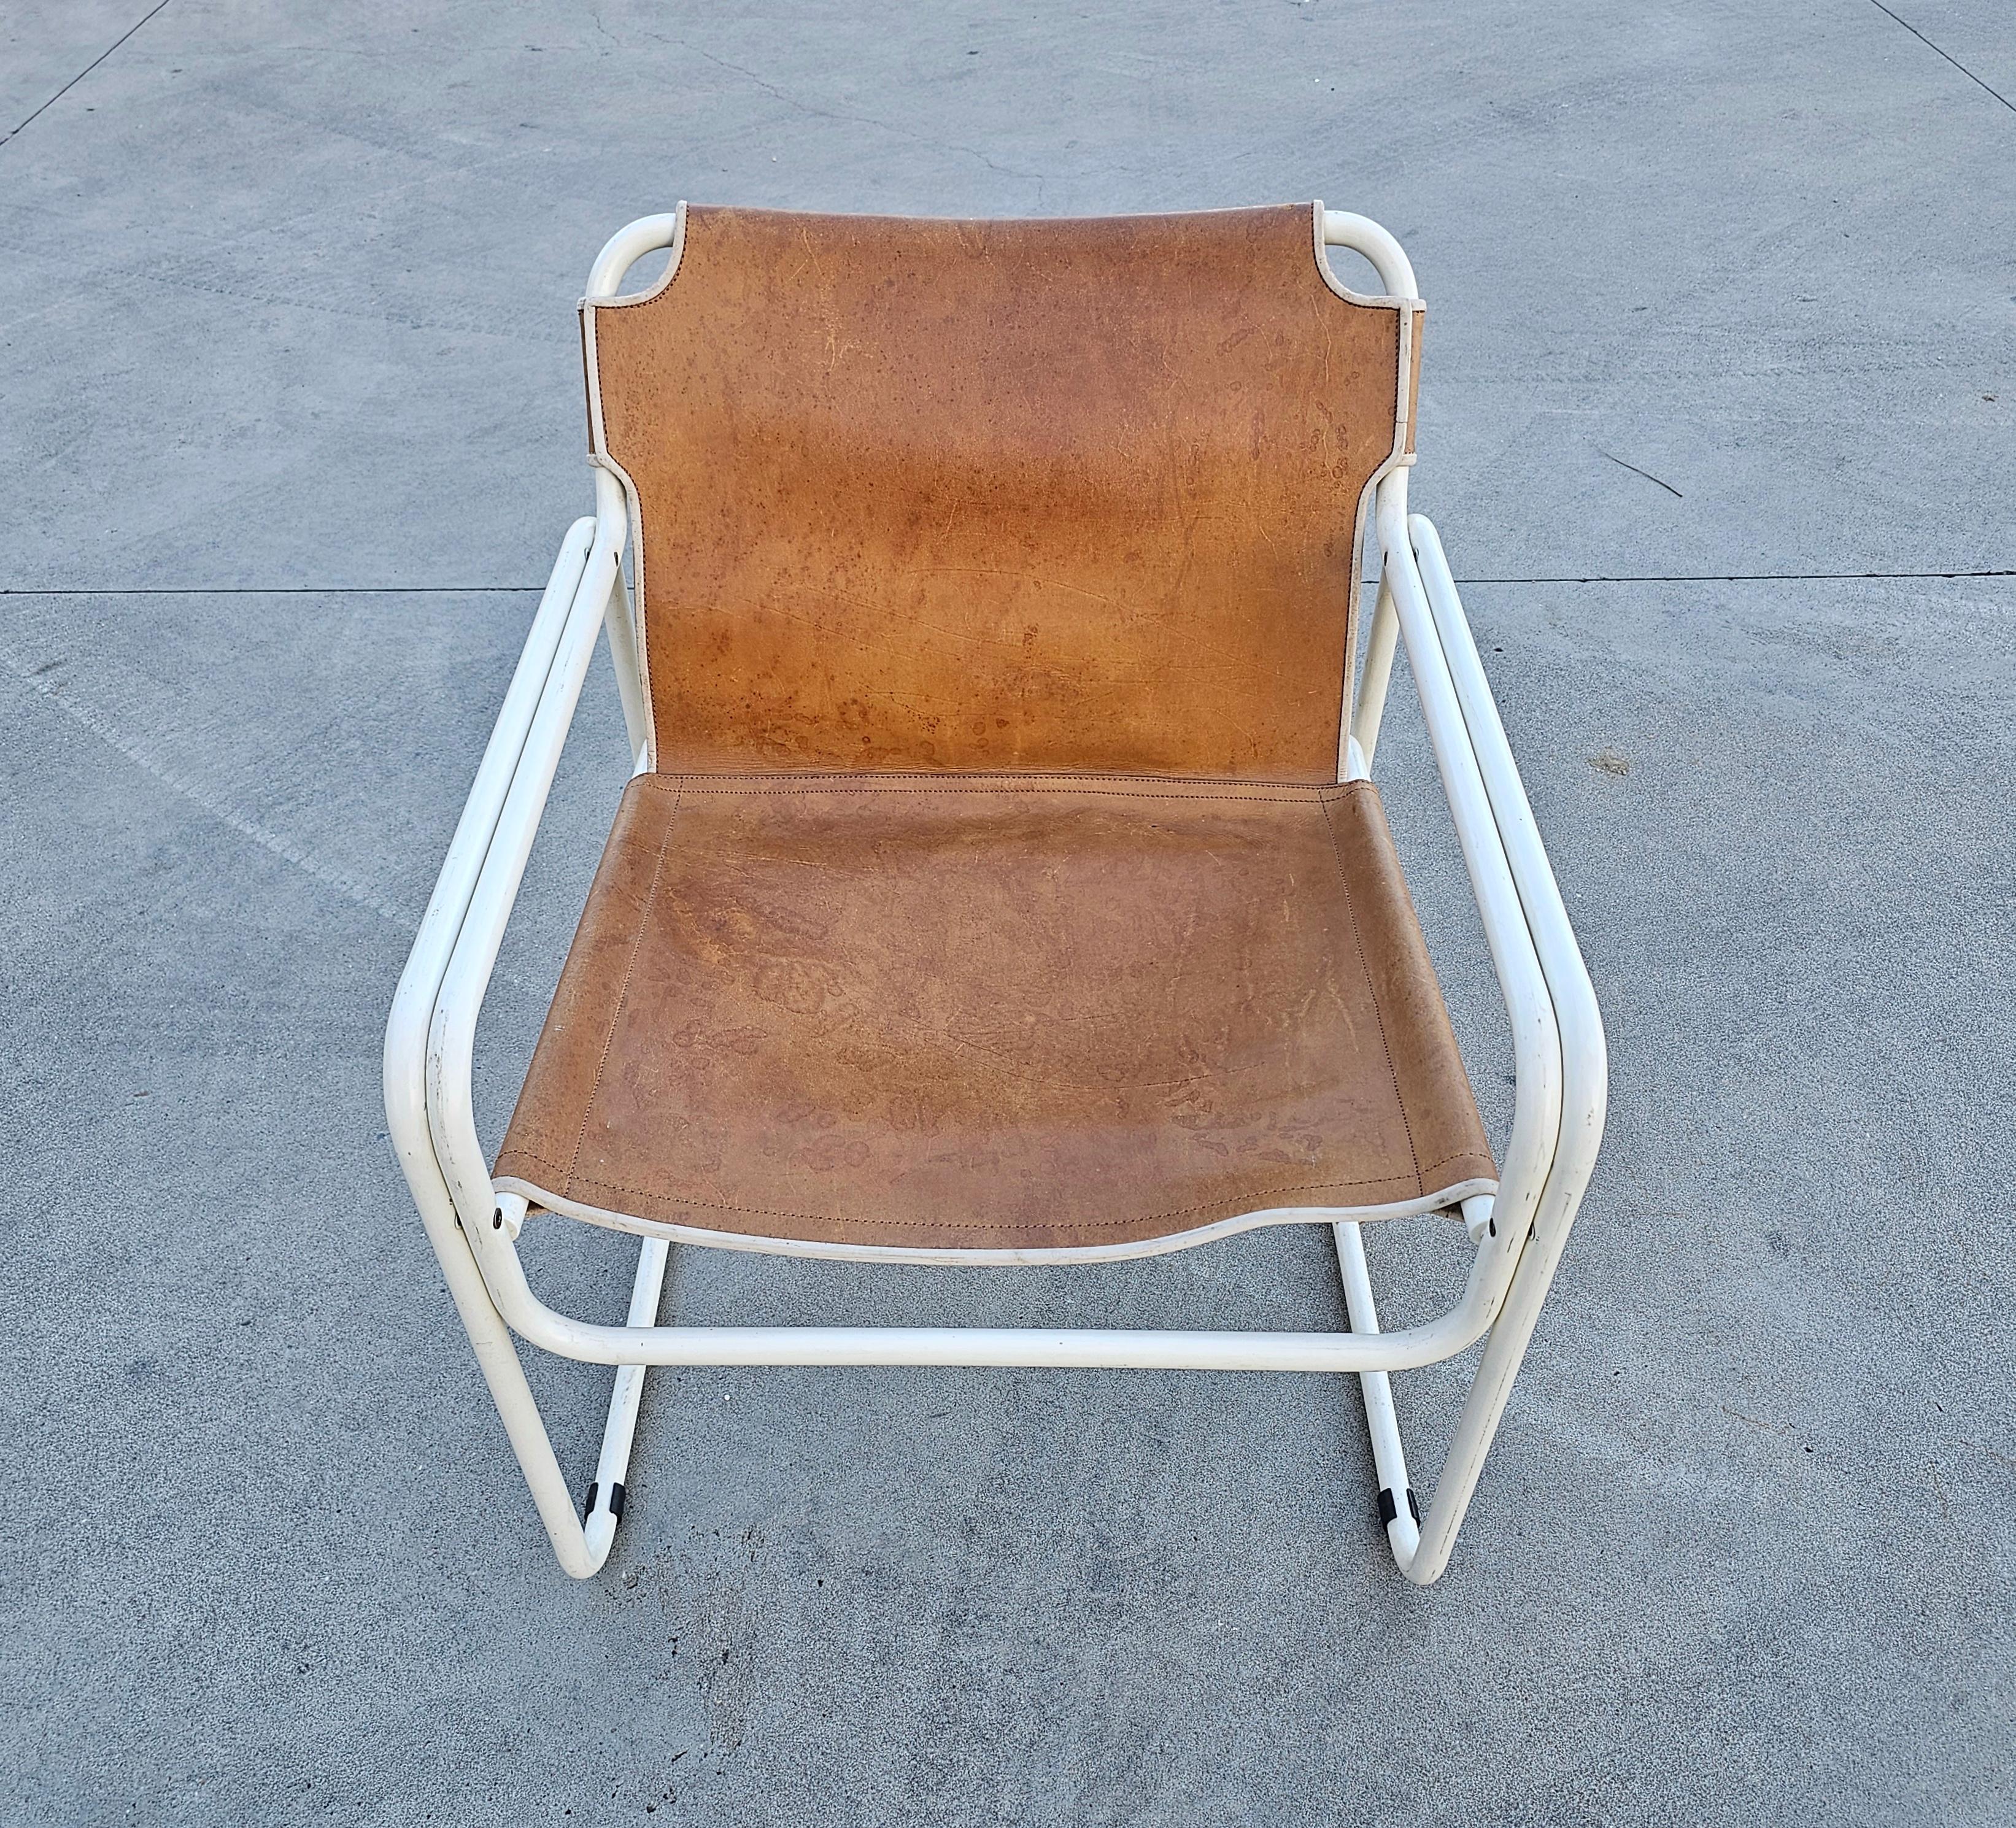 Bauhaus Style Tubular Easy Chairs in Cognac Leather by Jox Interni, 1970s For Sale 1